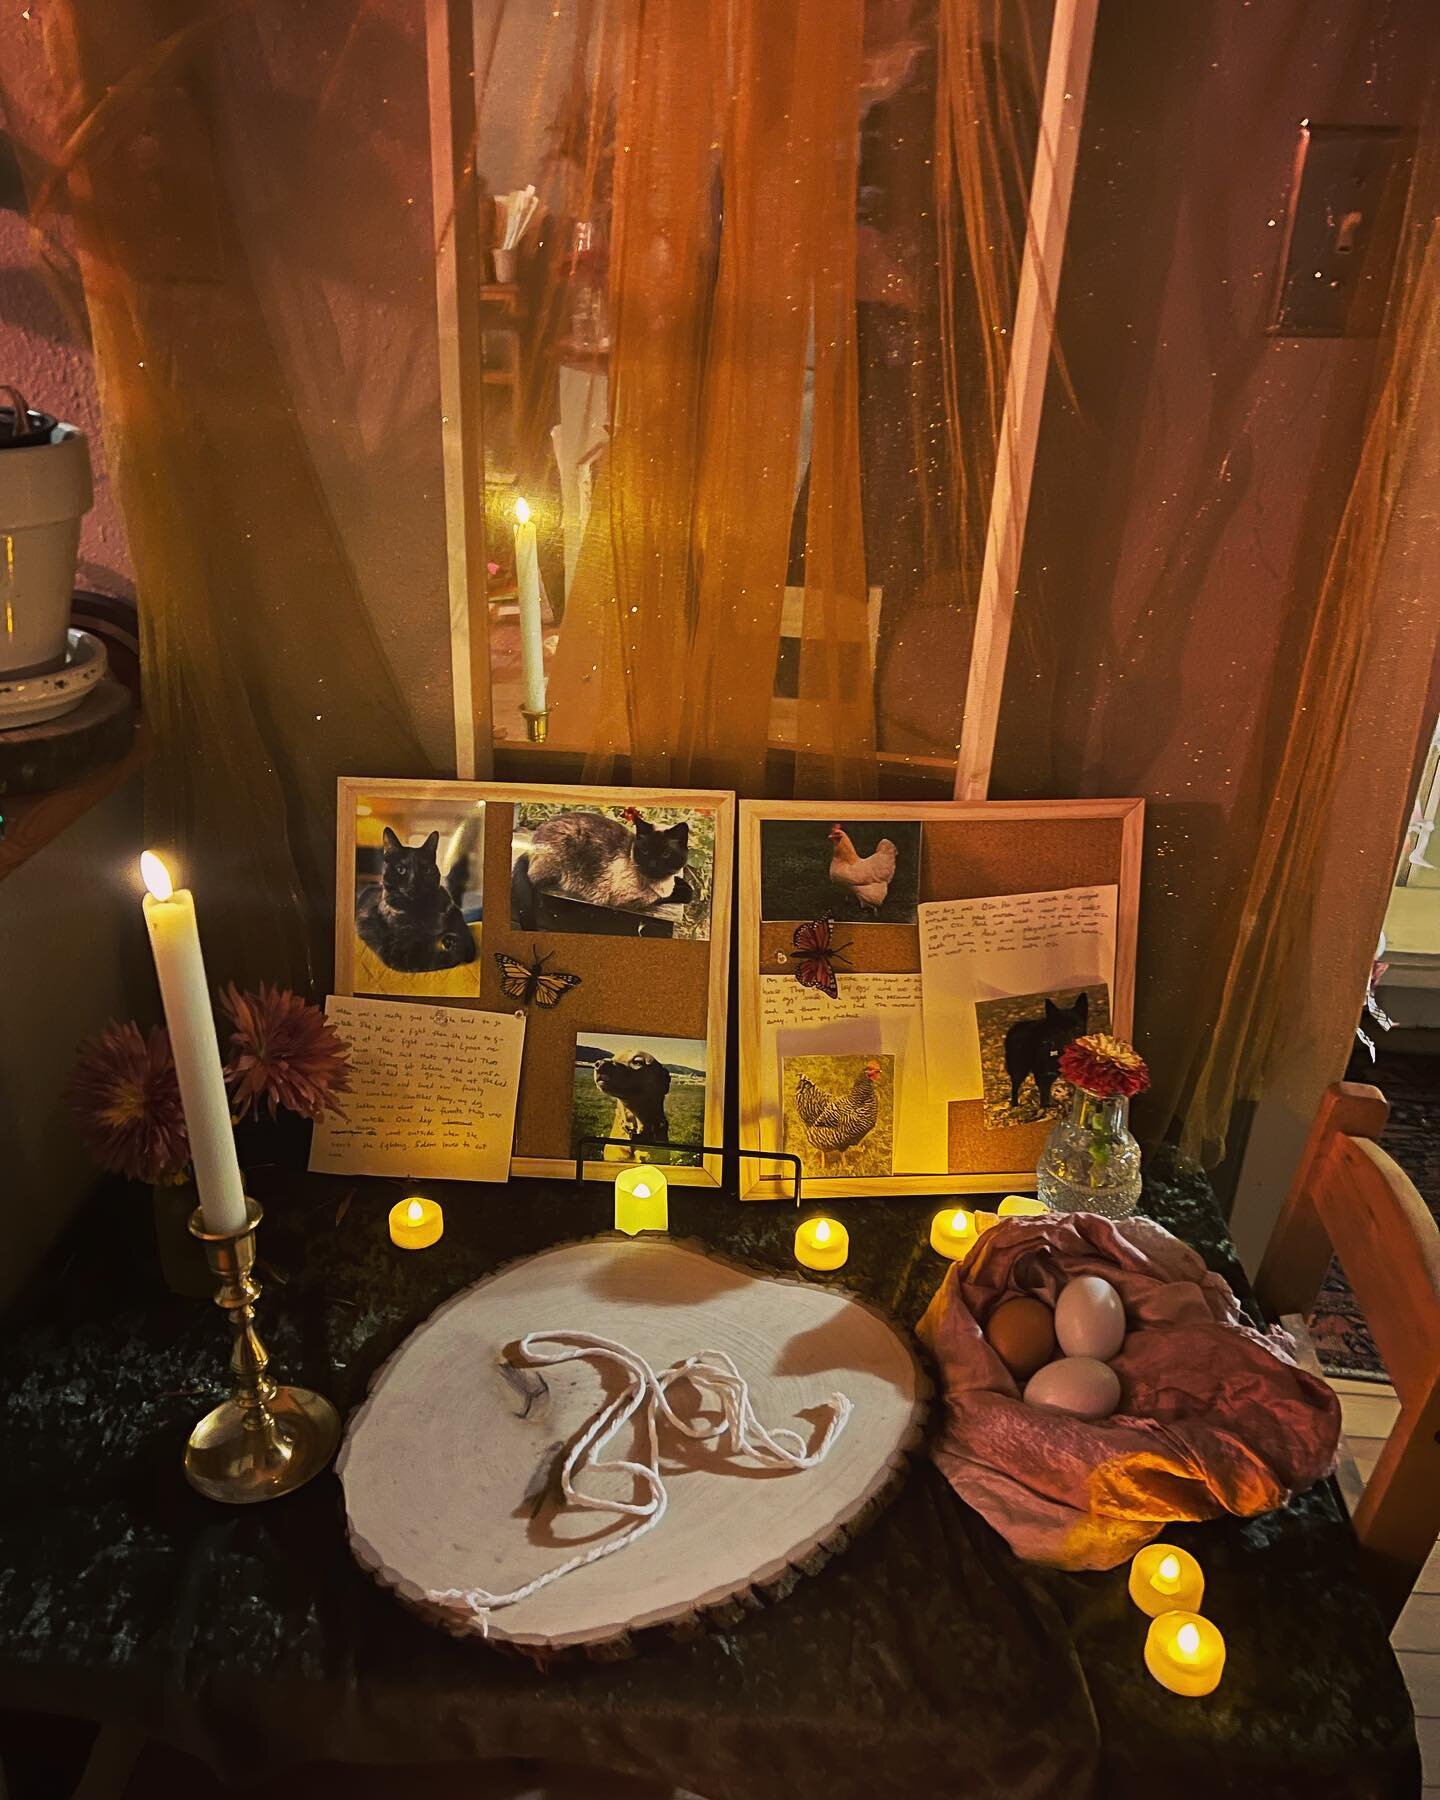 Emerson shared with us his family tradition of making an offrenda for Dia de los Muertos. We all brought photos of dear pets that we&rsquo;ve lost and shared stories about their lifetimes and some memories we had with them. This came at a time where 